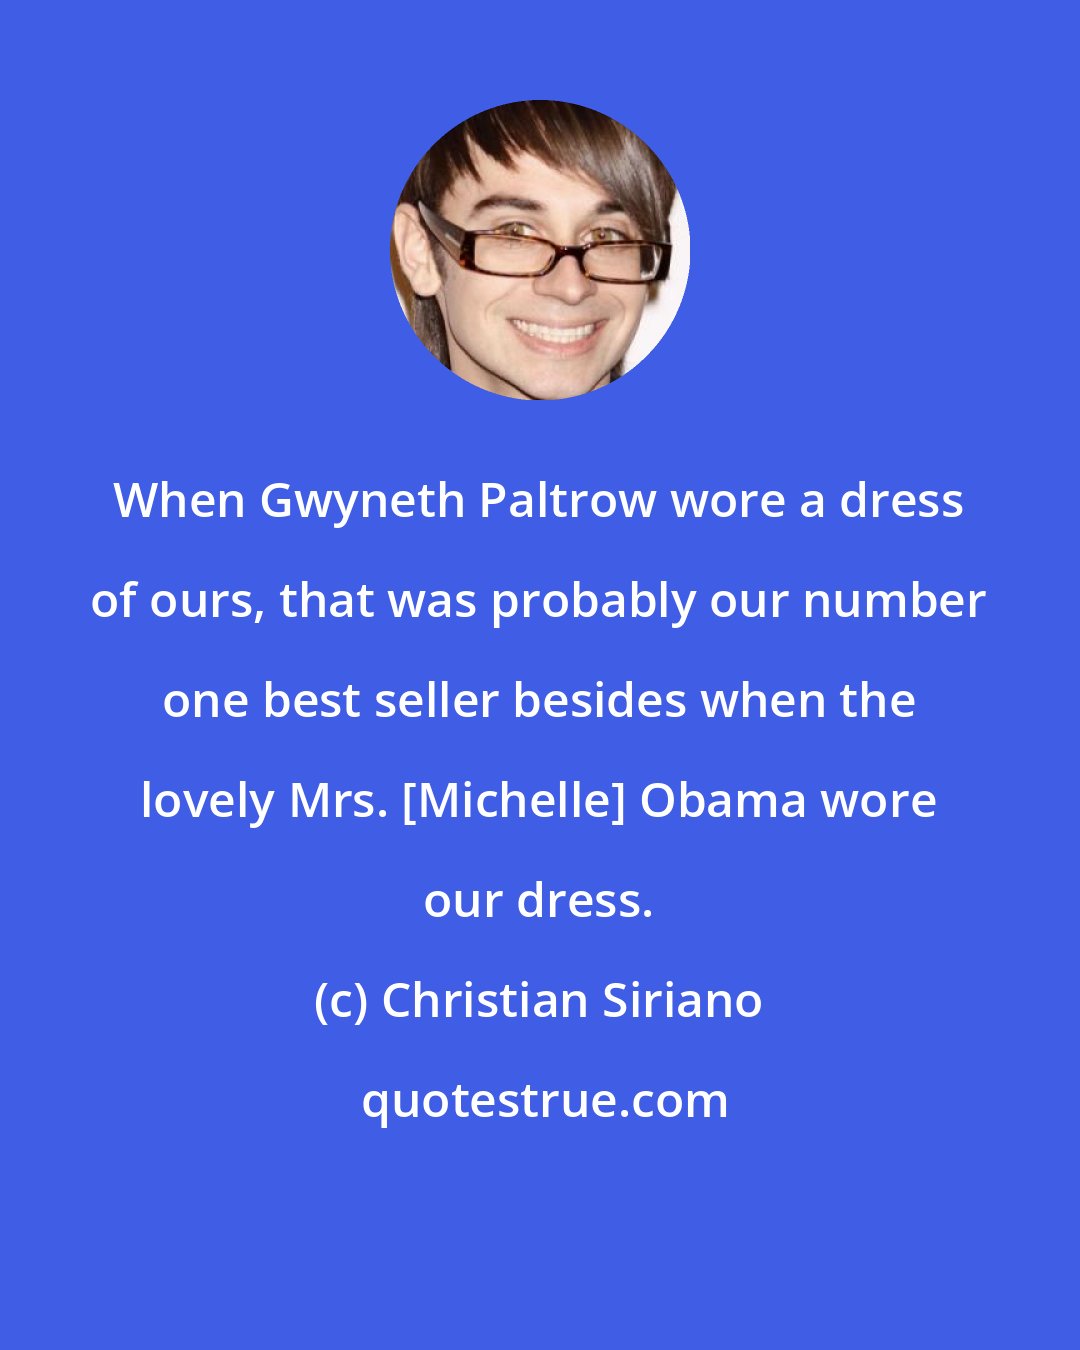 Christian Siriano: When Gwyneth Paltrow wore a dress of ours, that was probably our number one best seller besides when the lovely Mrs. [Michelle] Obama wore our dress.